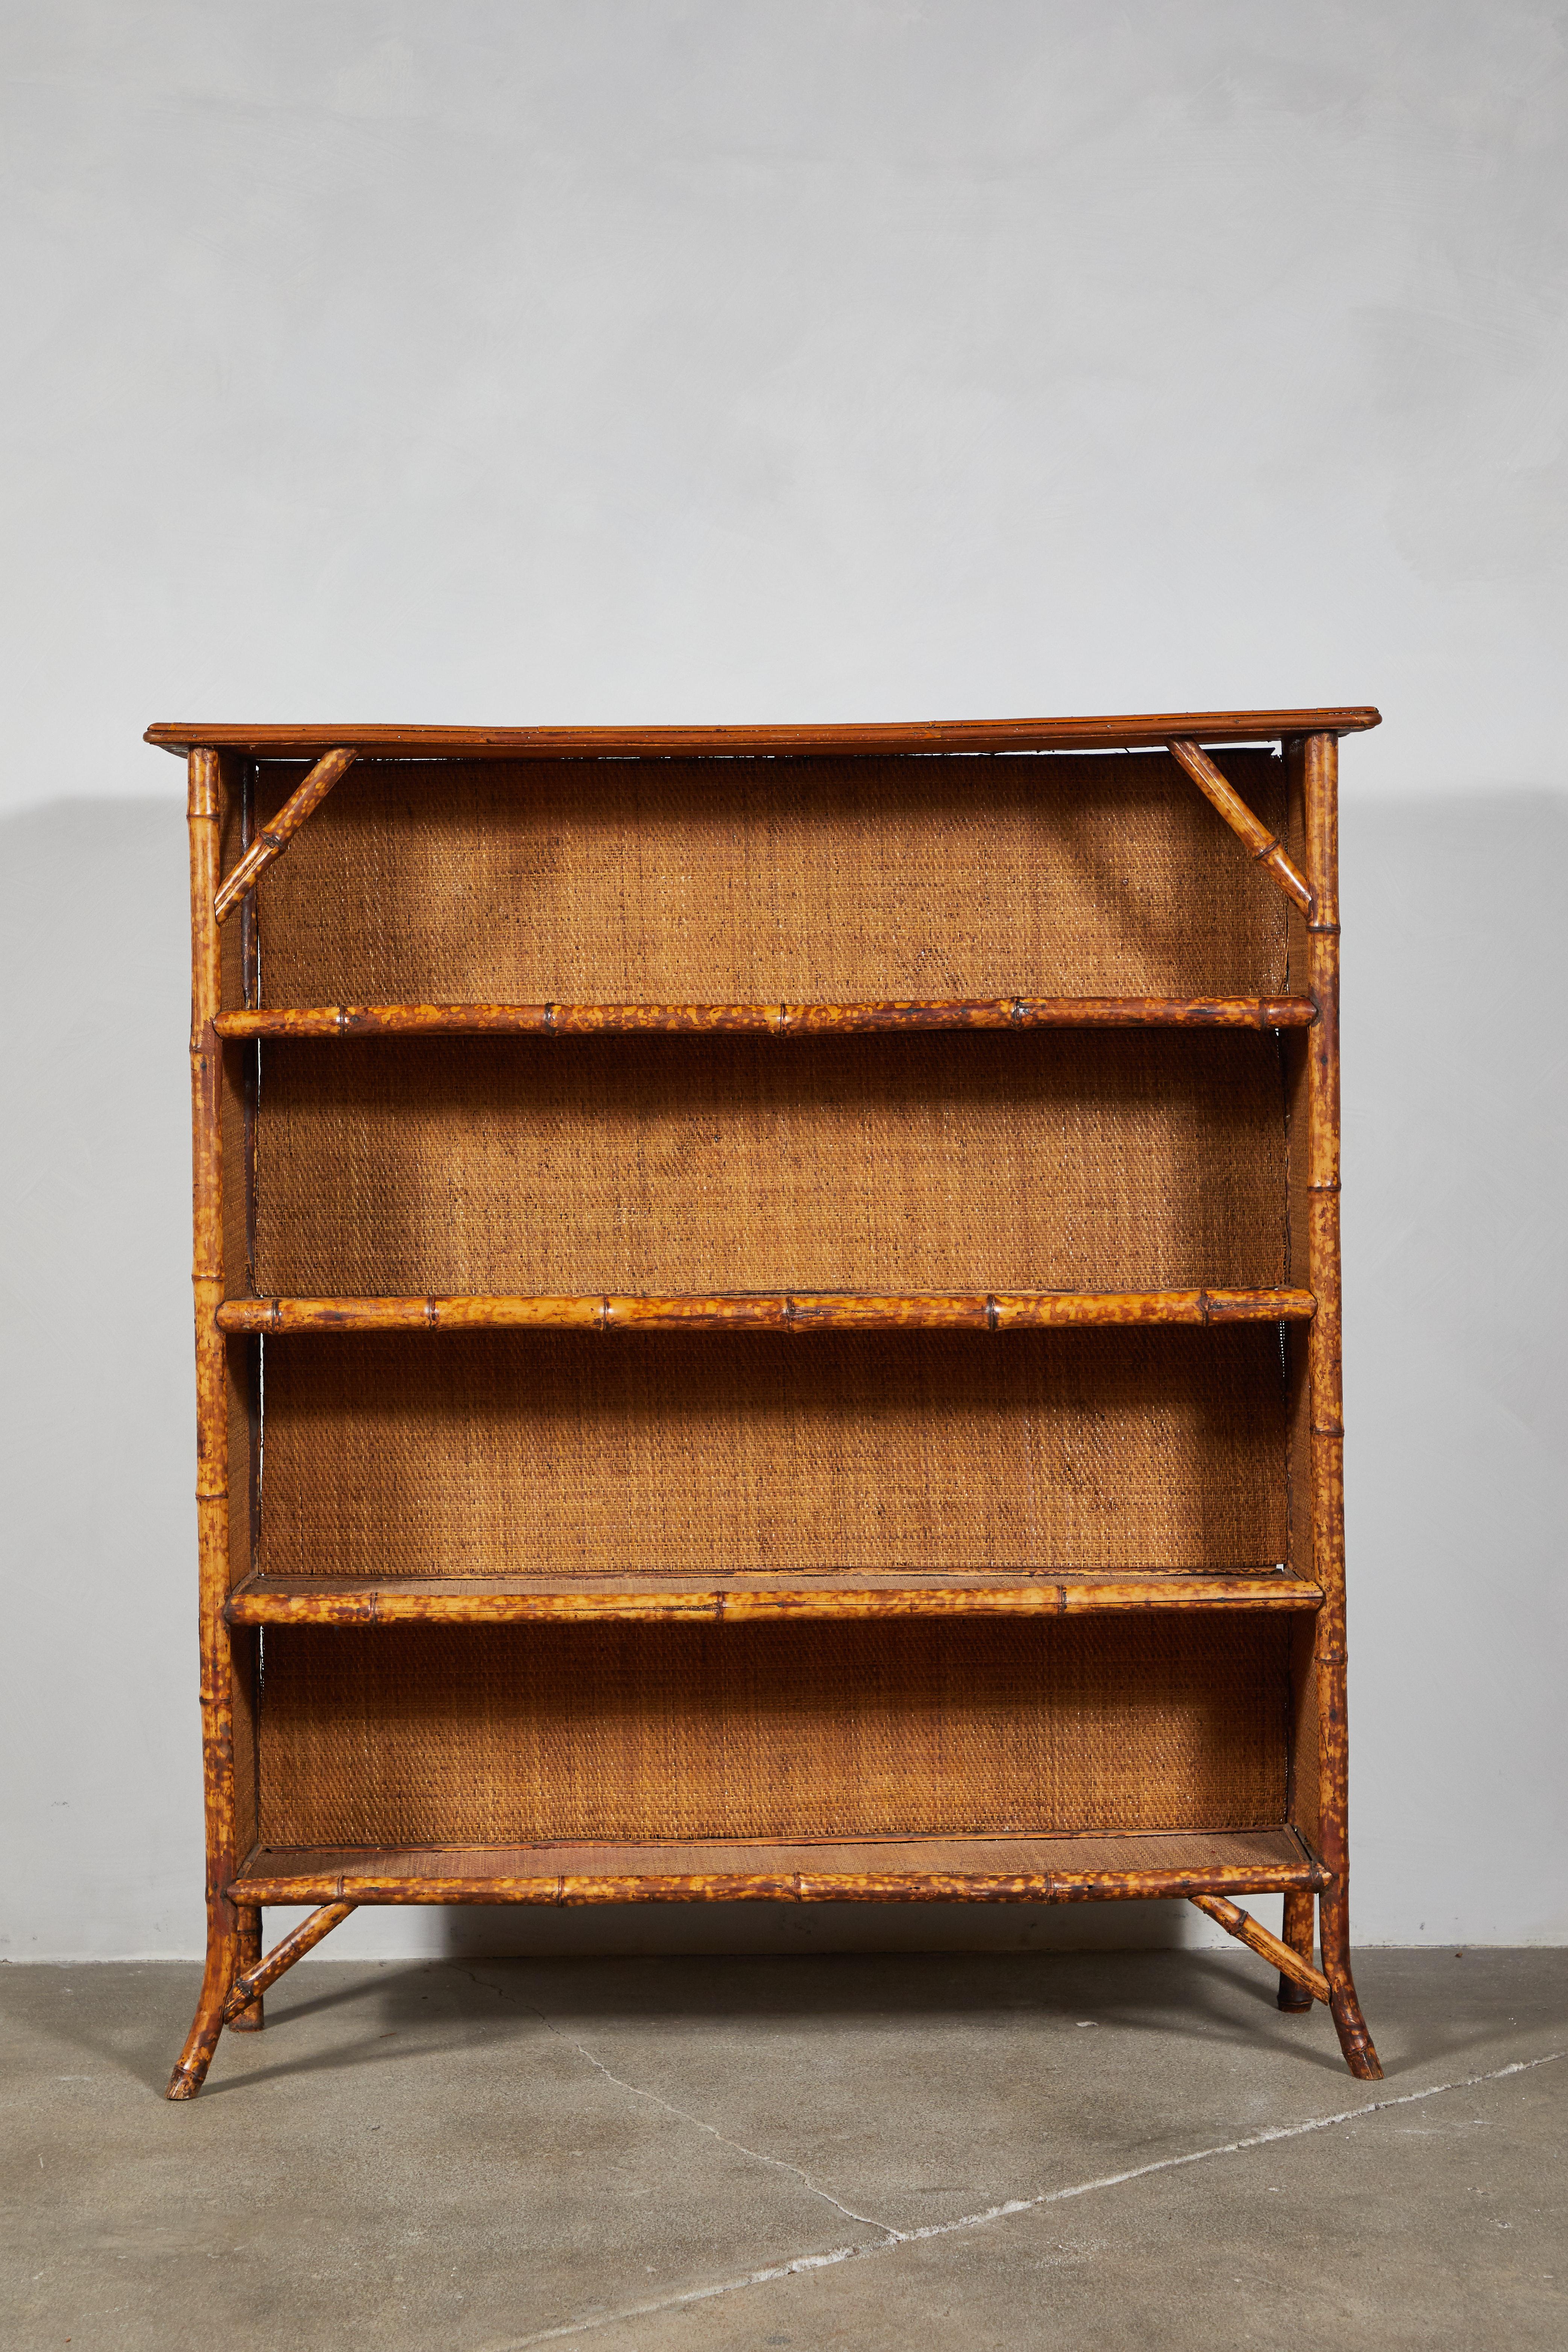 Vintage three-tiered bamboo shelf with woven frame.